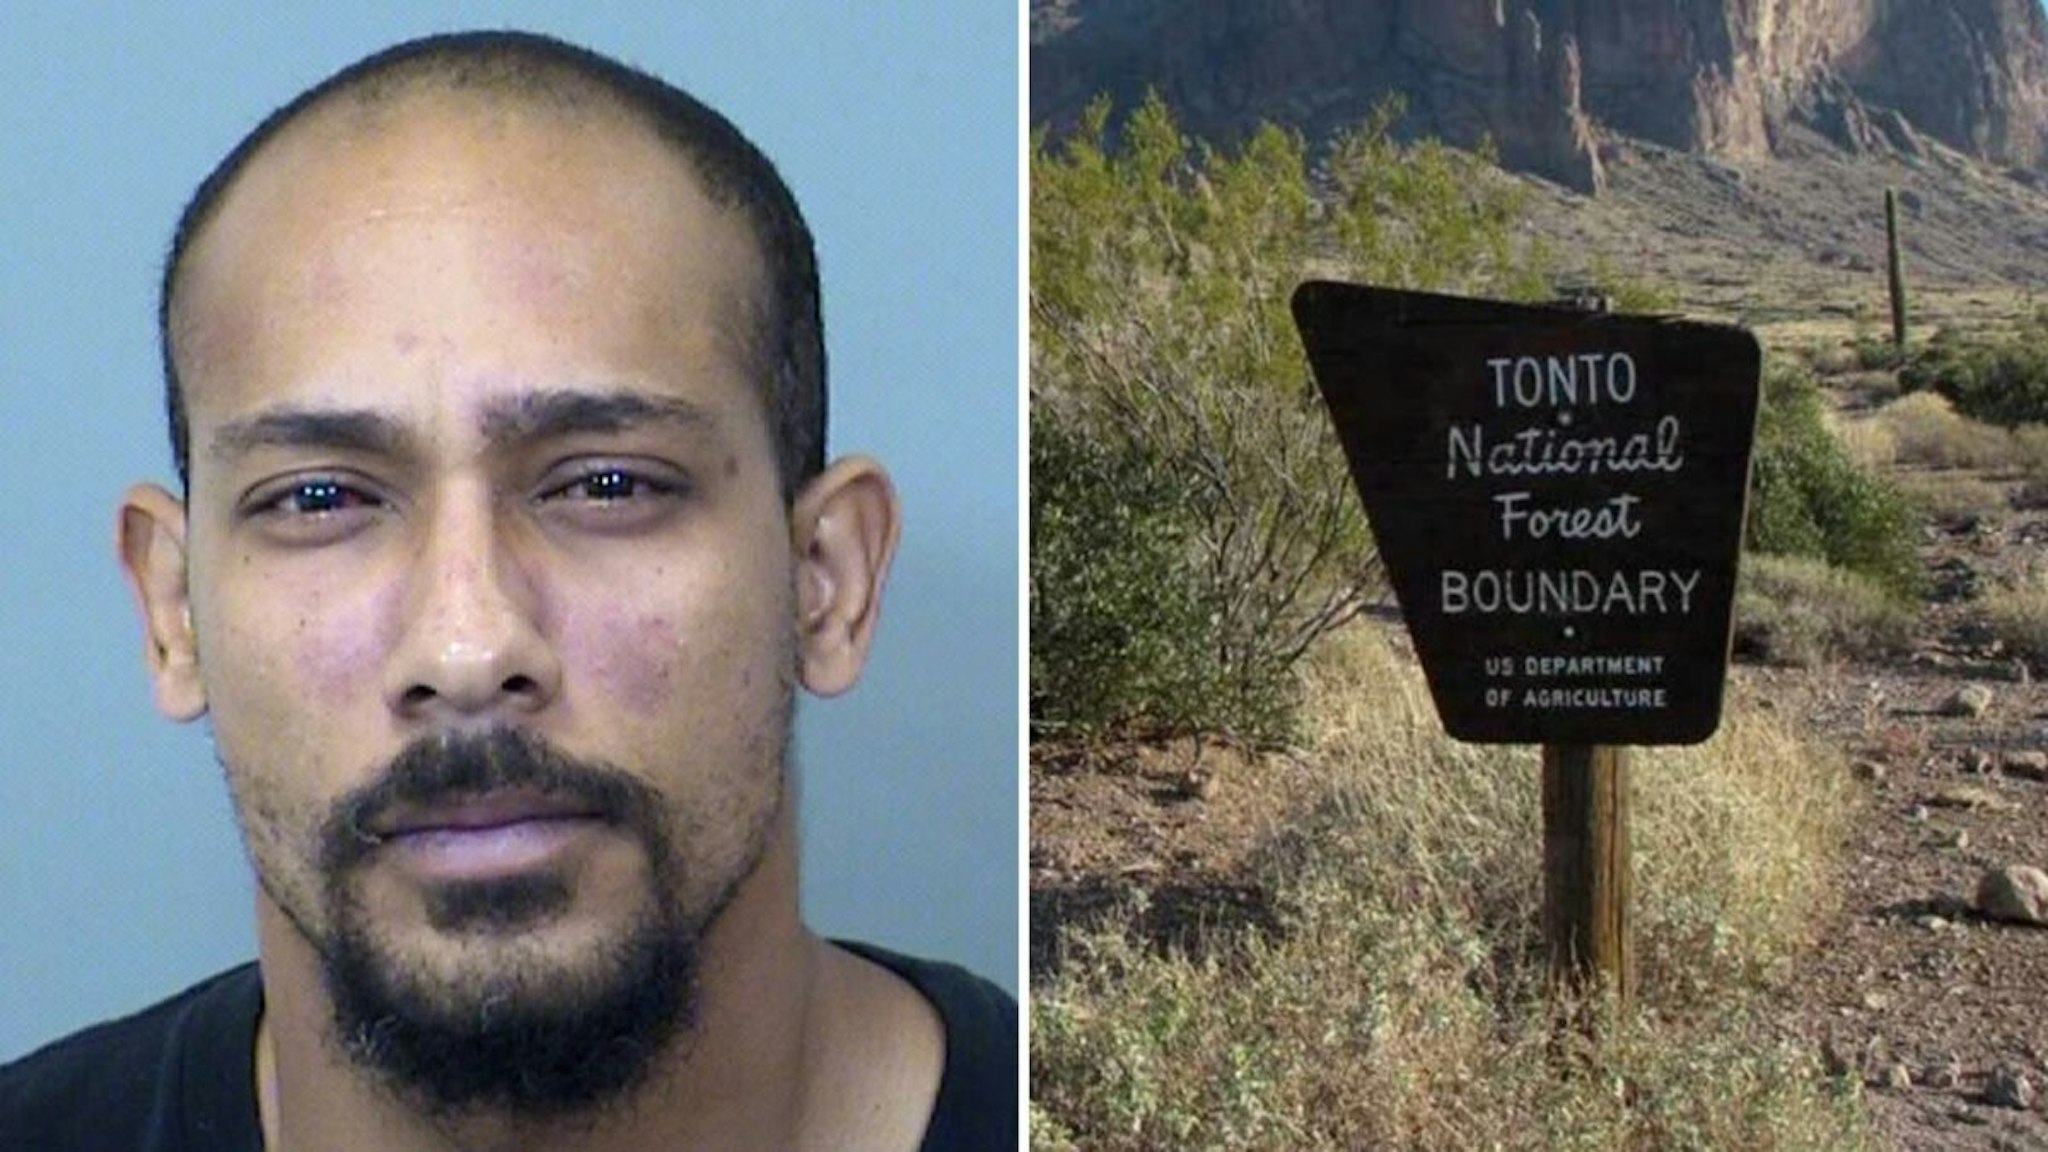 Anthonie Ruinard, Tonto National Forest